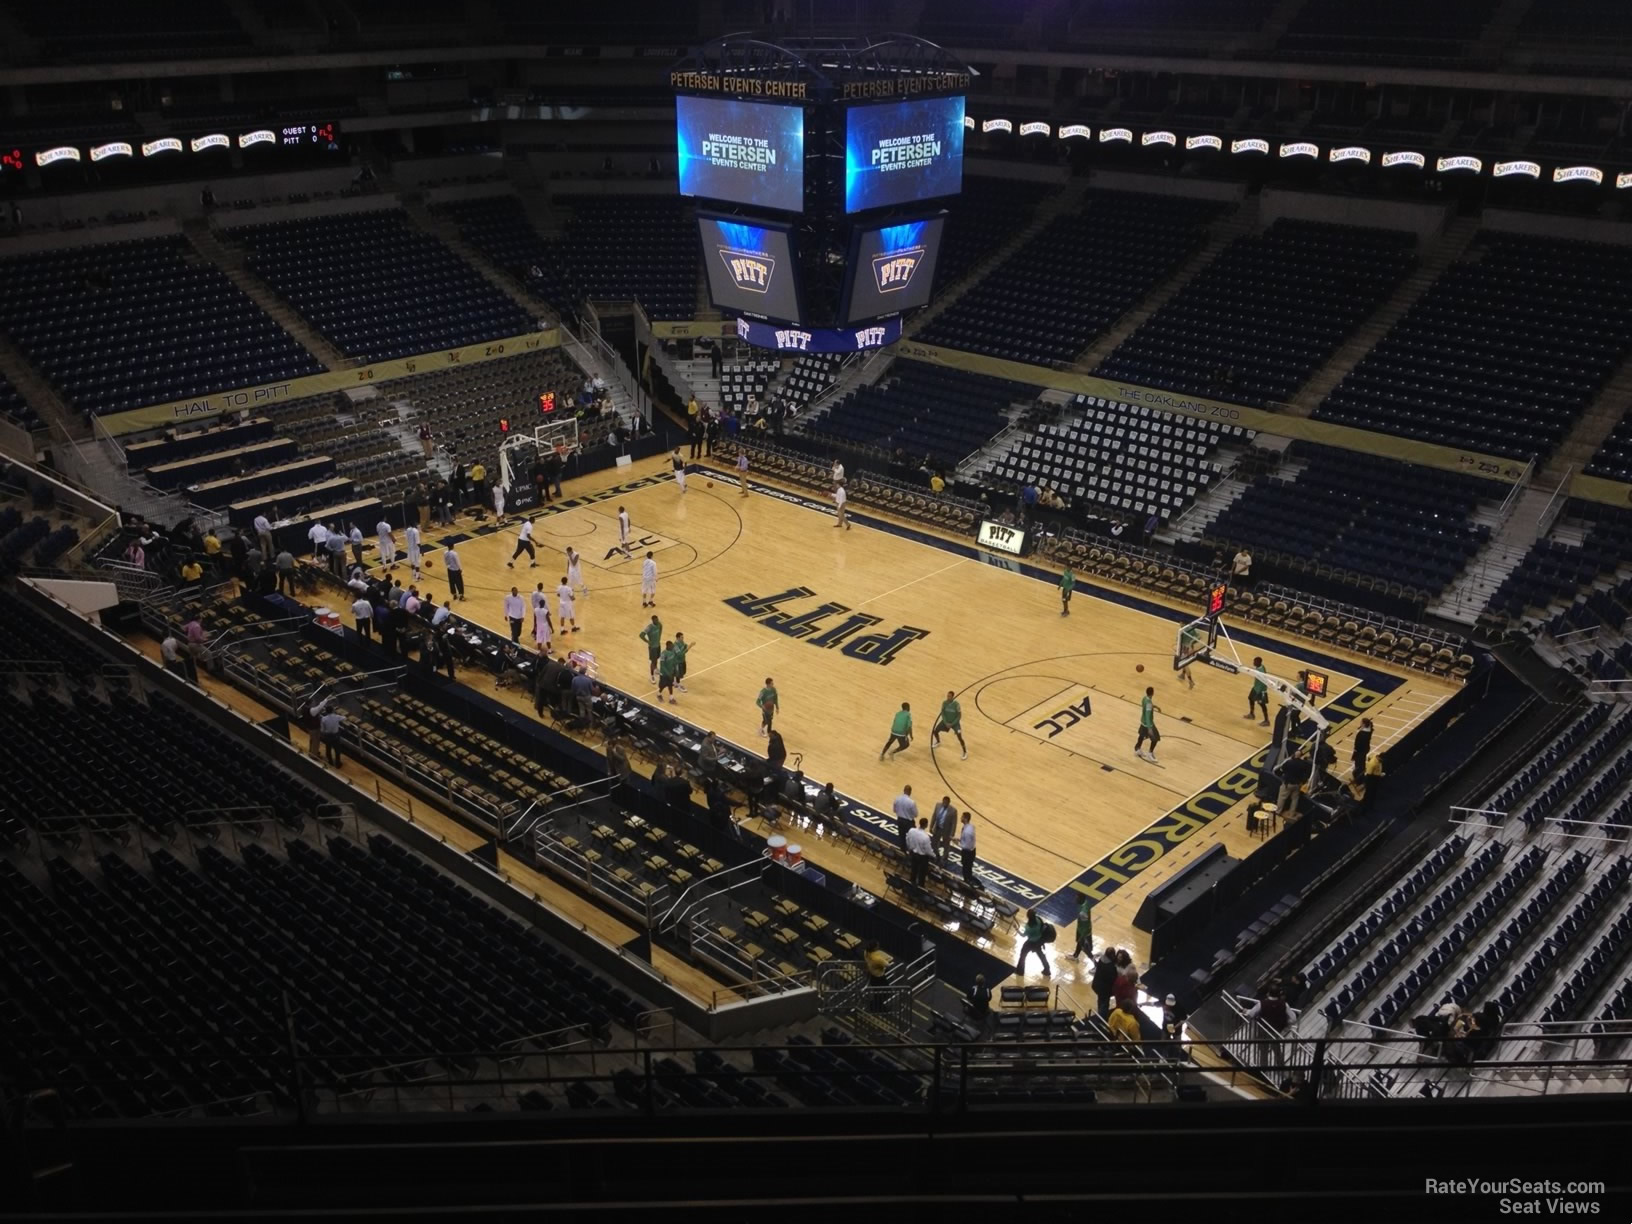 section 218, row f seat view  - petersen events center